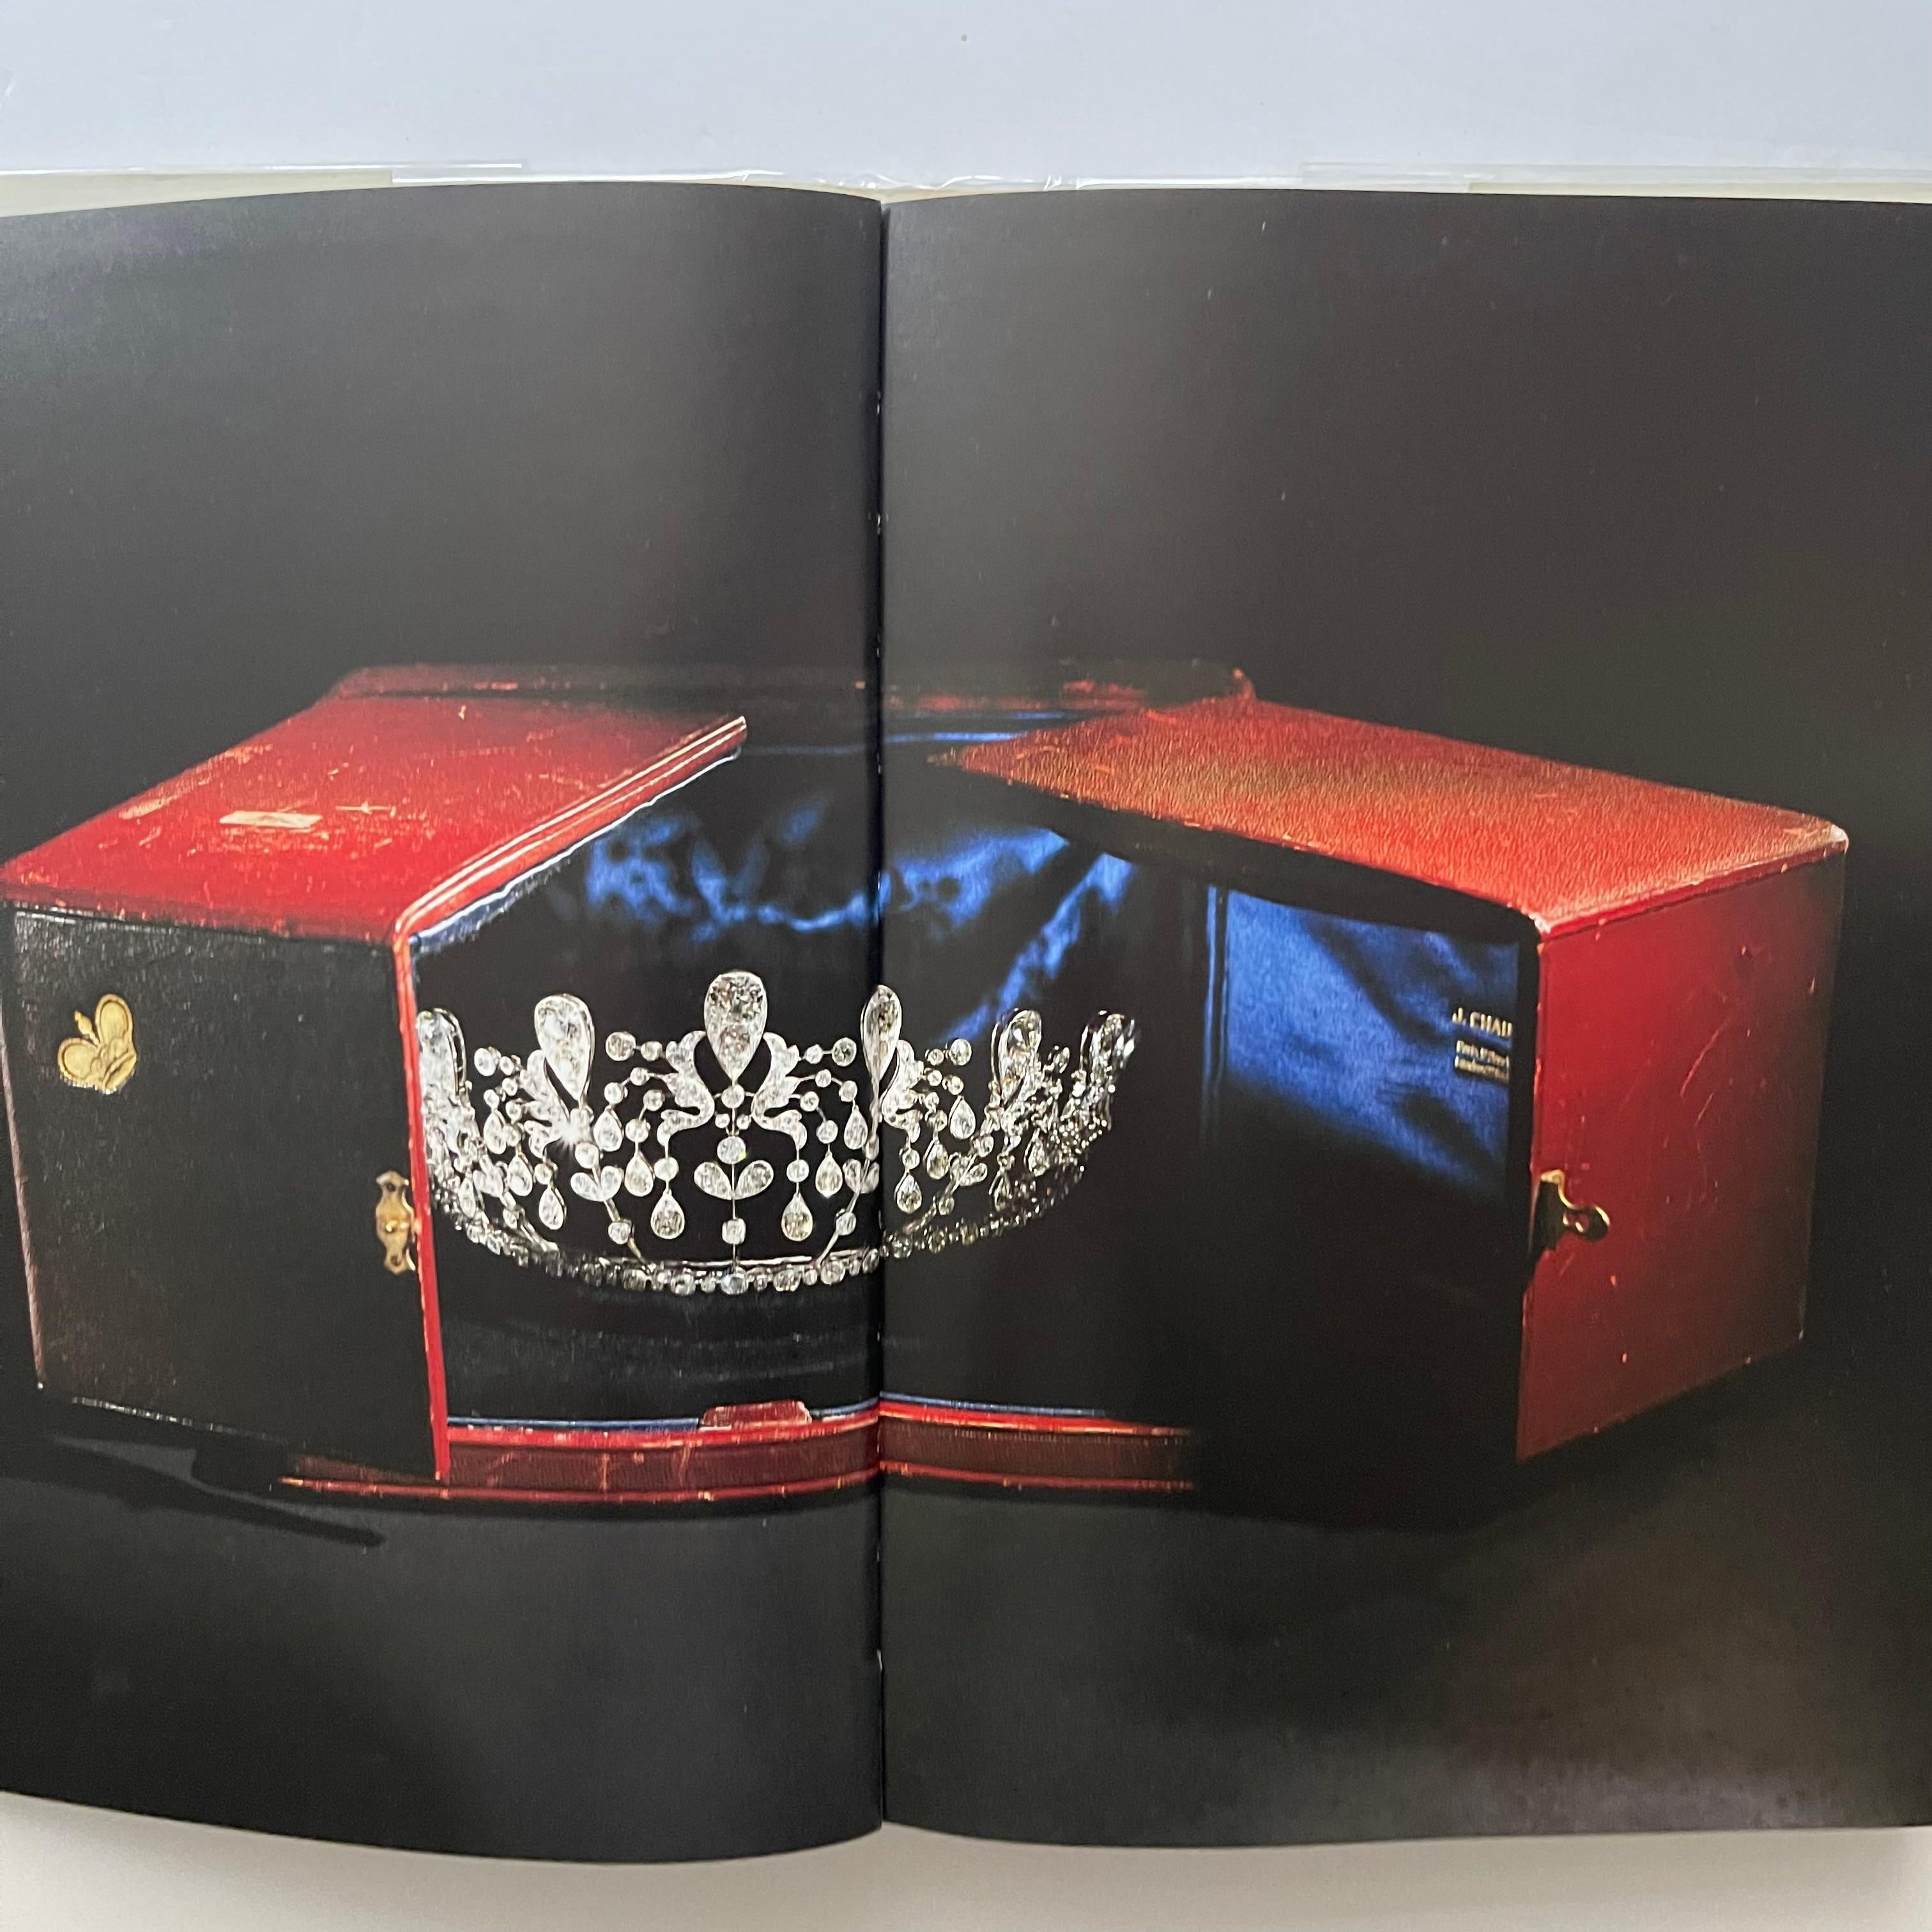 Published by Assouline 2002 written by Diana SacirsbrickA sumptuous selection of jewelry made to adorn the head - tiaras, aigrettes and bandeaux. Emblems of success and happiness, tiaras are some of the most beautifully crafted jewelry pieces of the